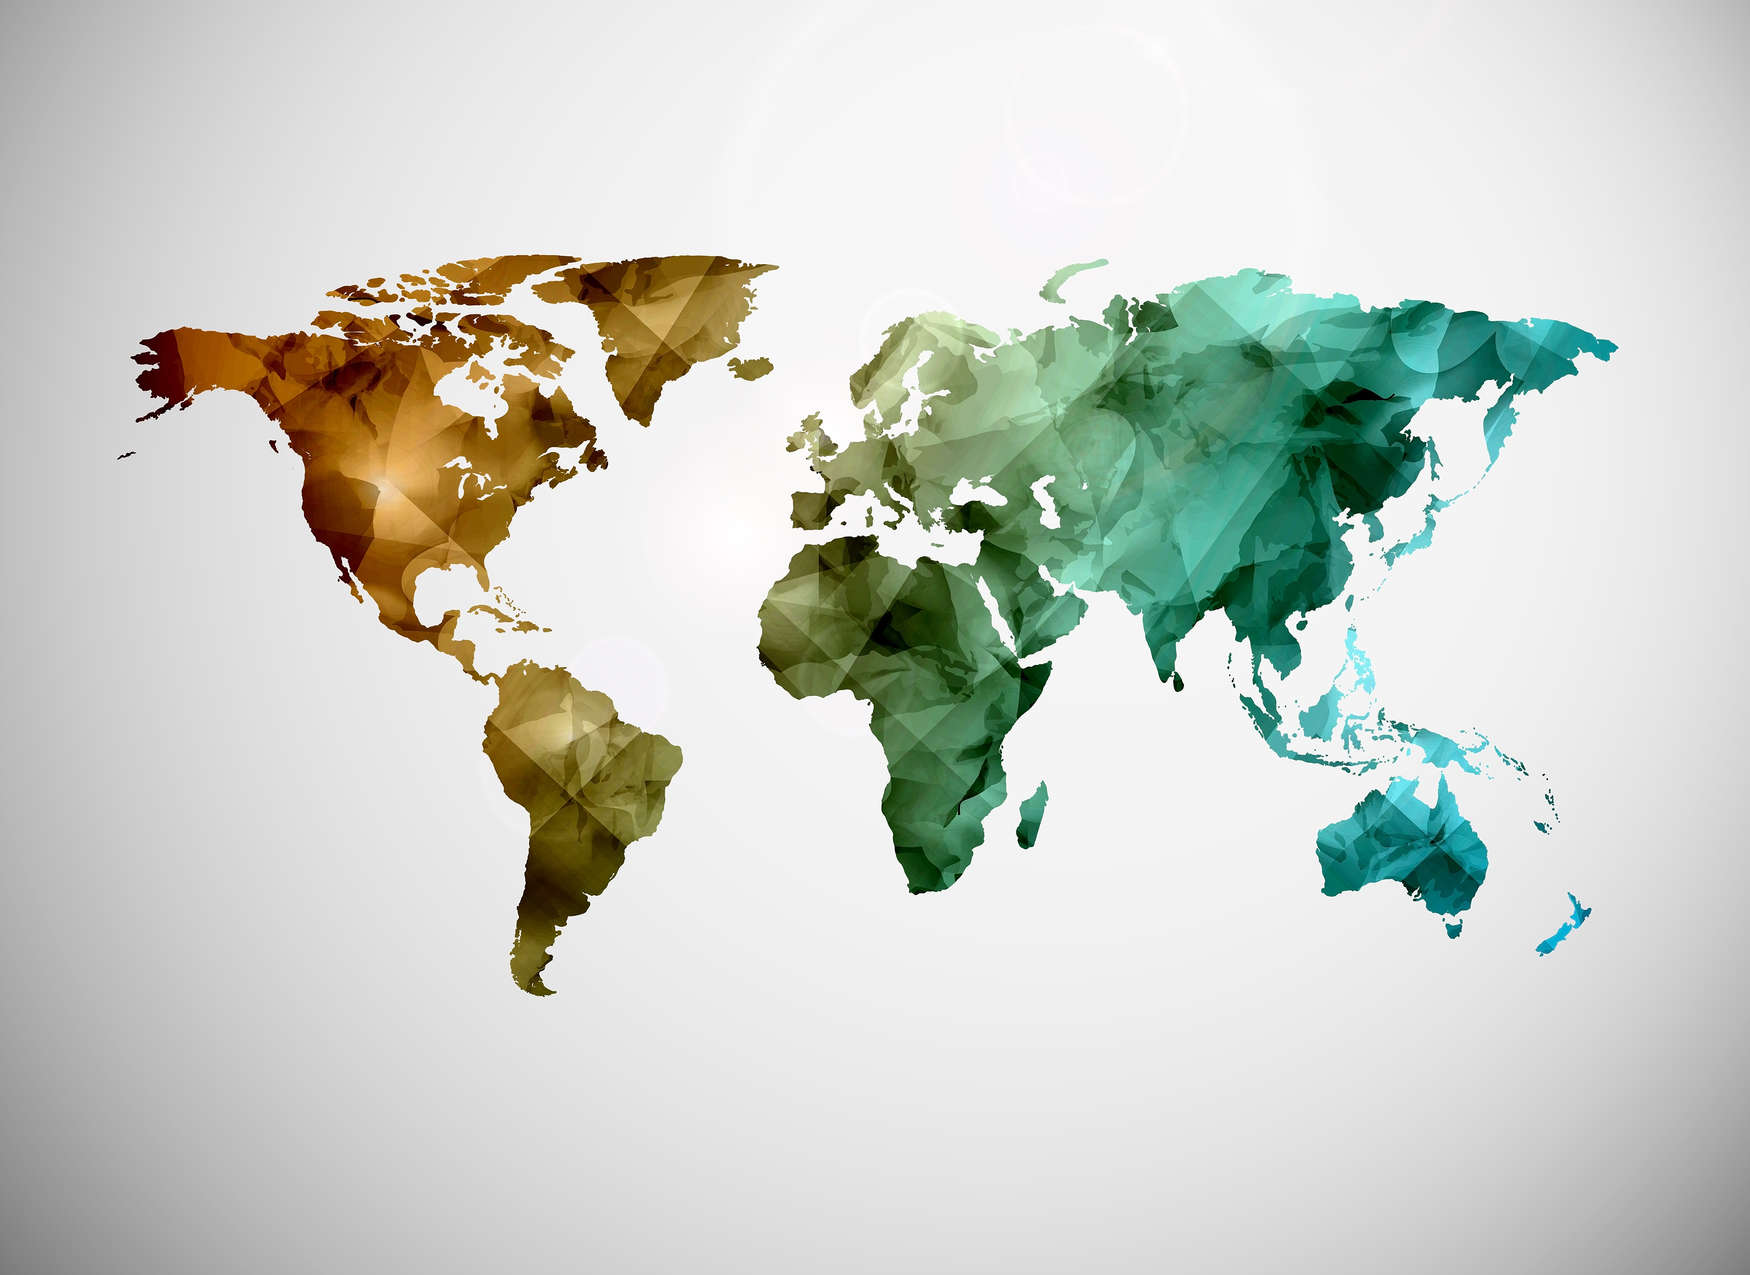             World map from graphic elements - Colorful, White
        